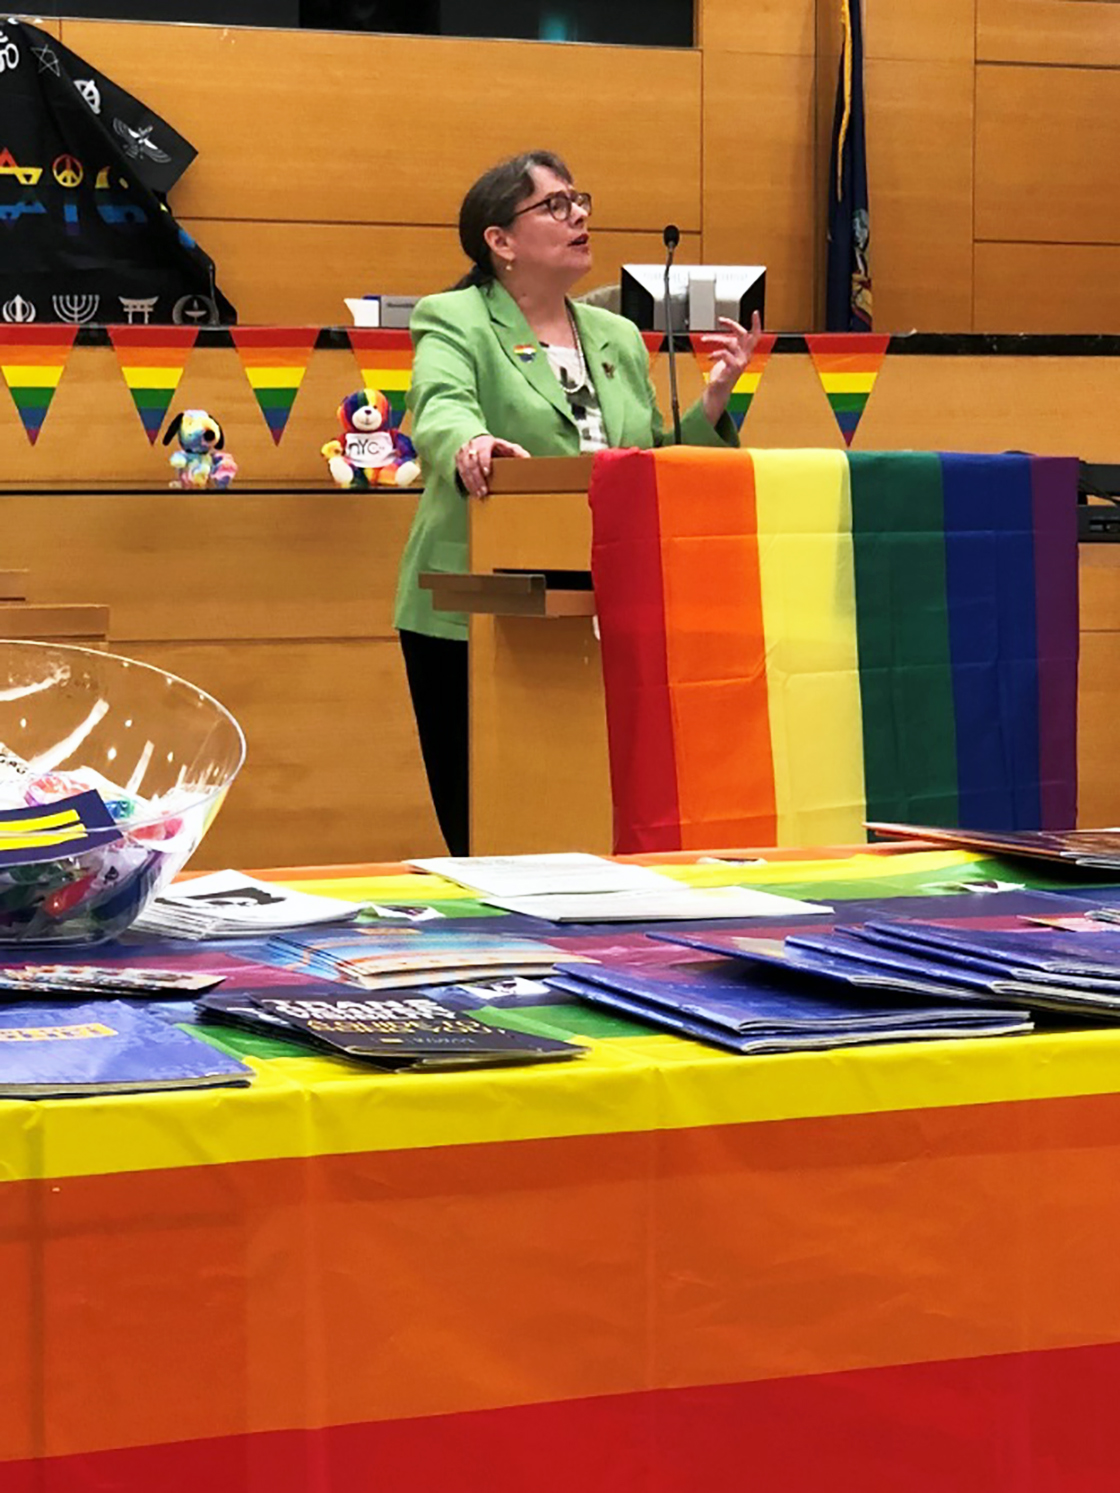 Failla Commission Member Judge Karen Lupuloff speaks at the New York City Family Court Pride event in Brooklyn (June 12, 2018)